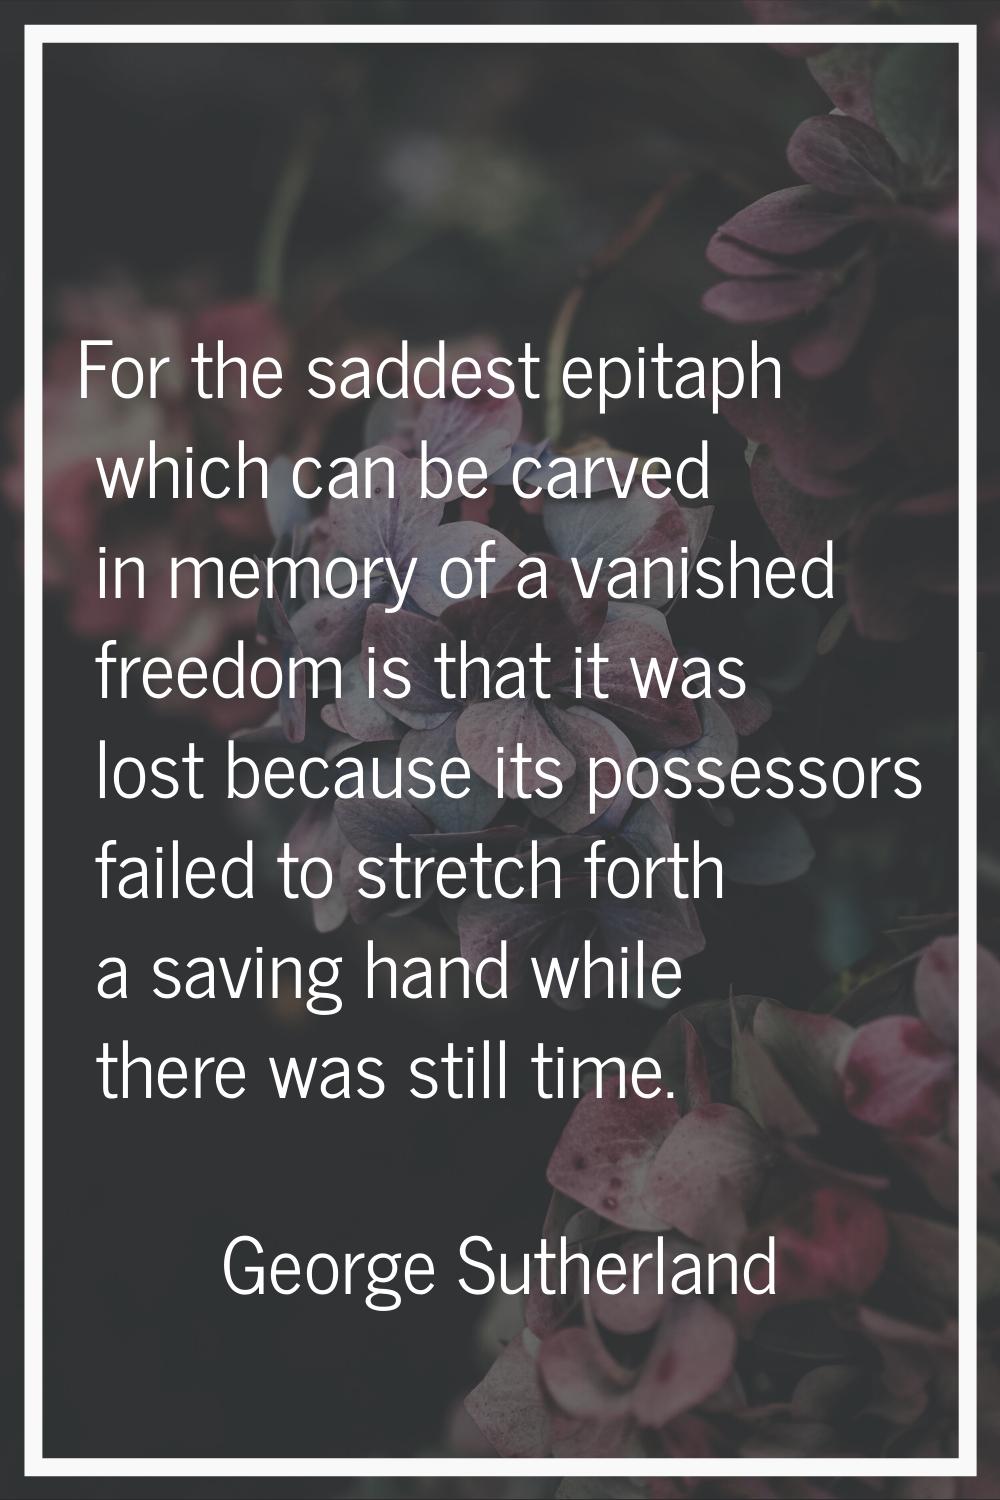 For the saddest epitaph which can be carved in memory of a vanished freedom is that it was lost bec